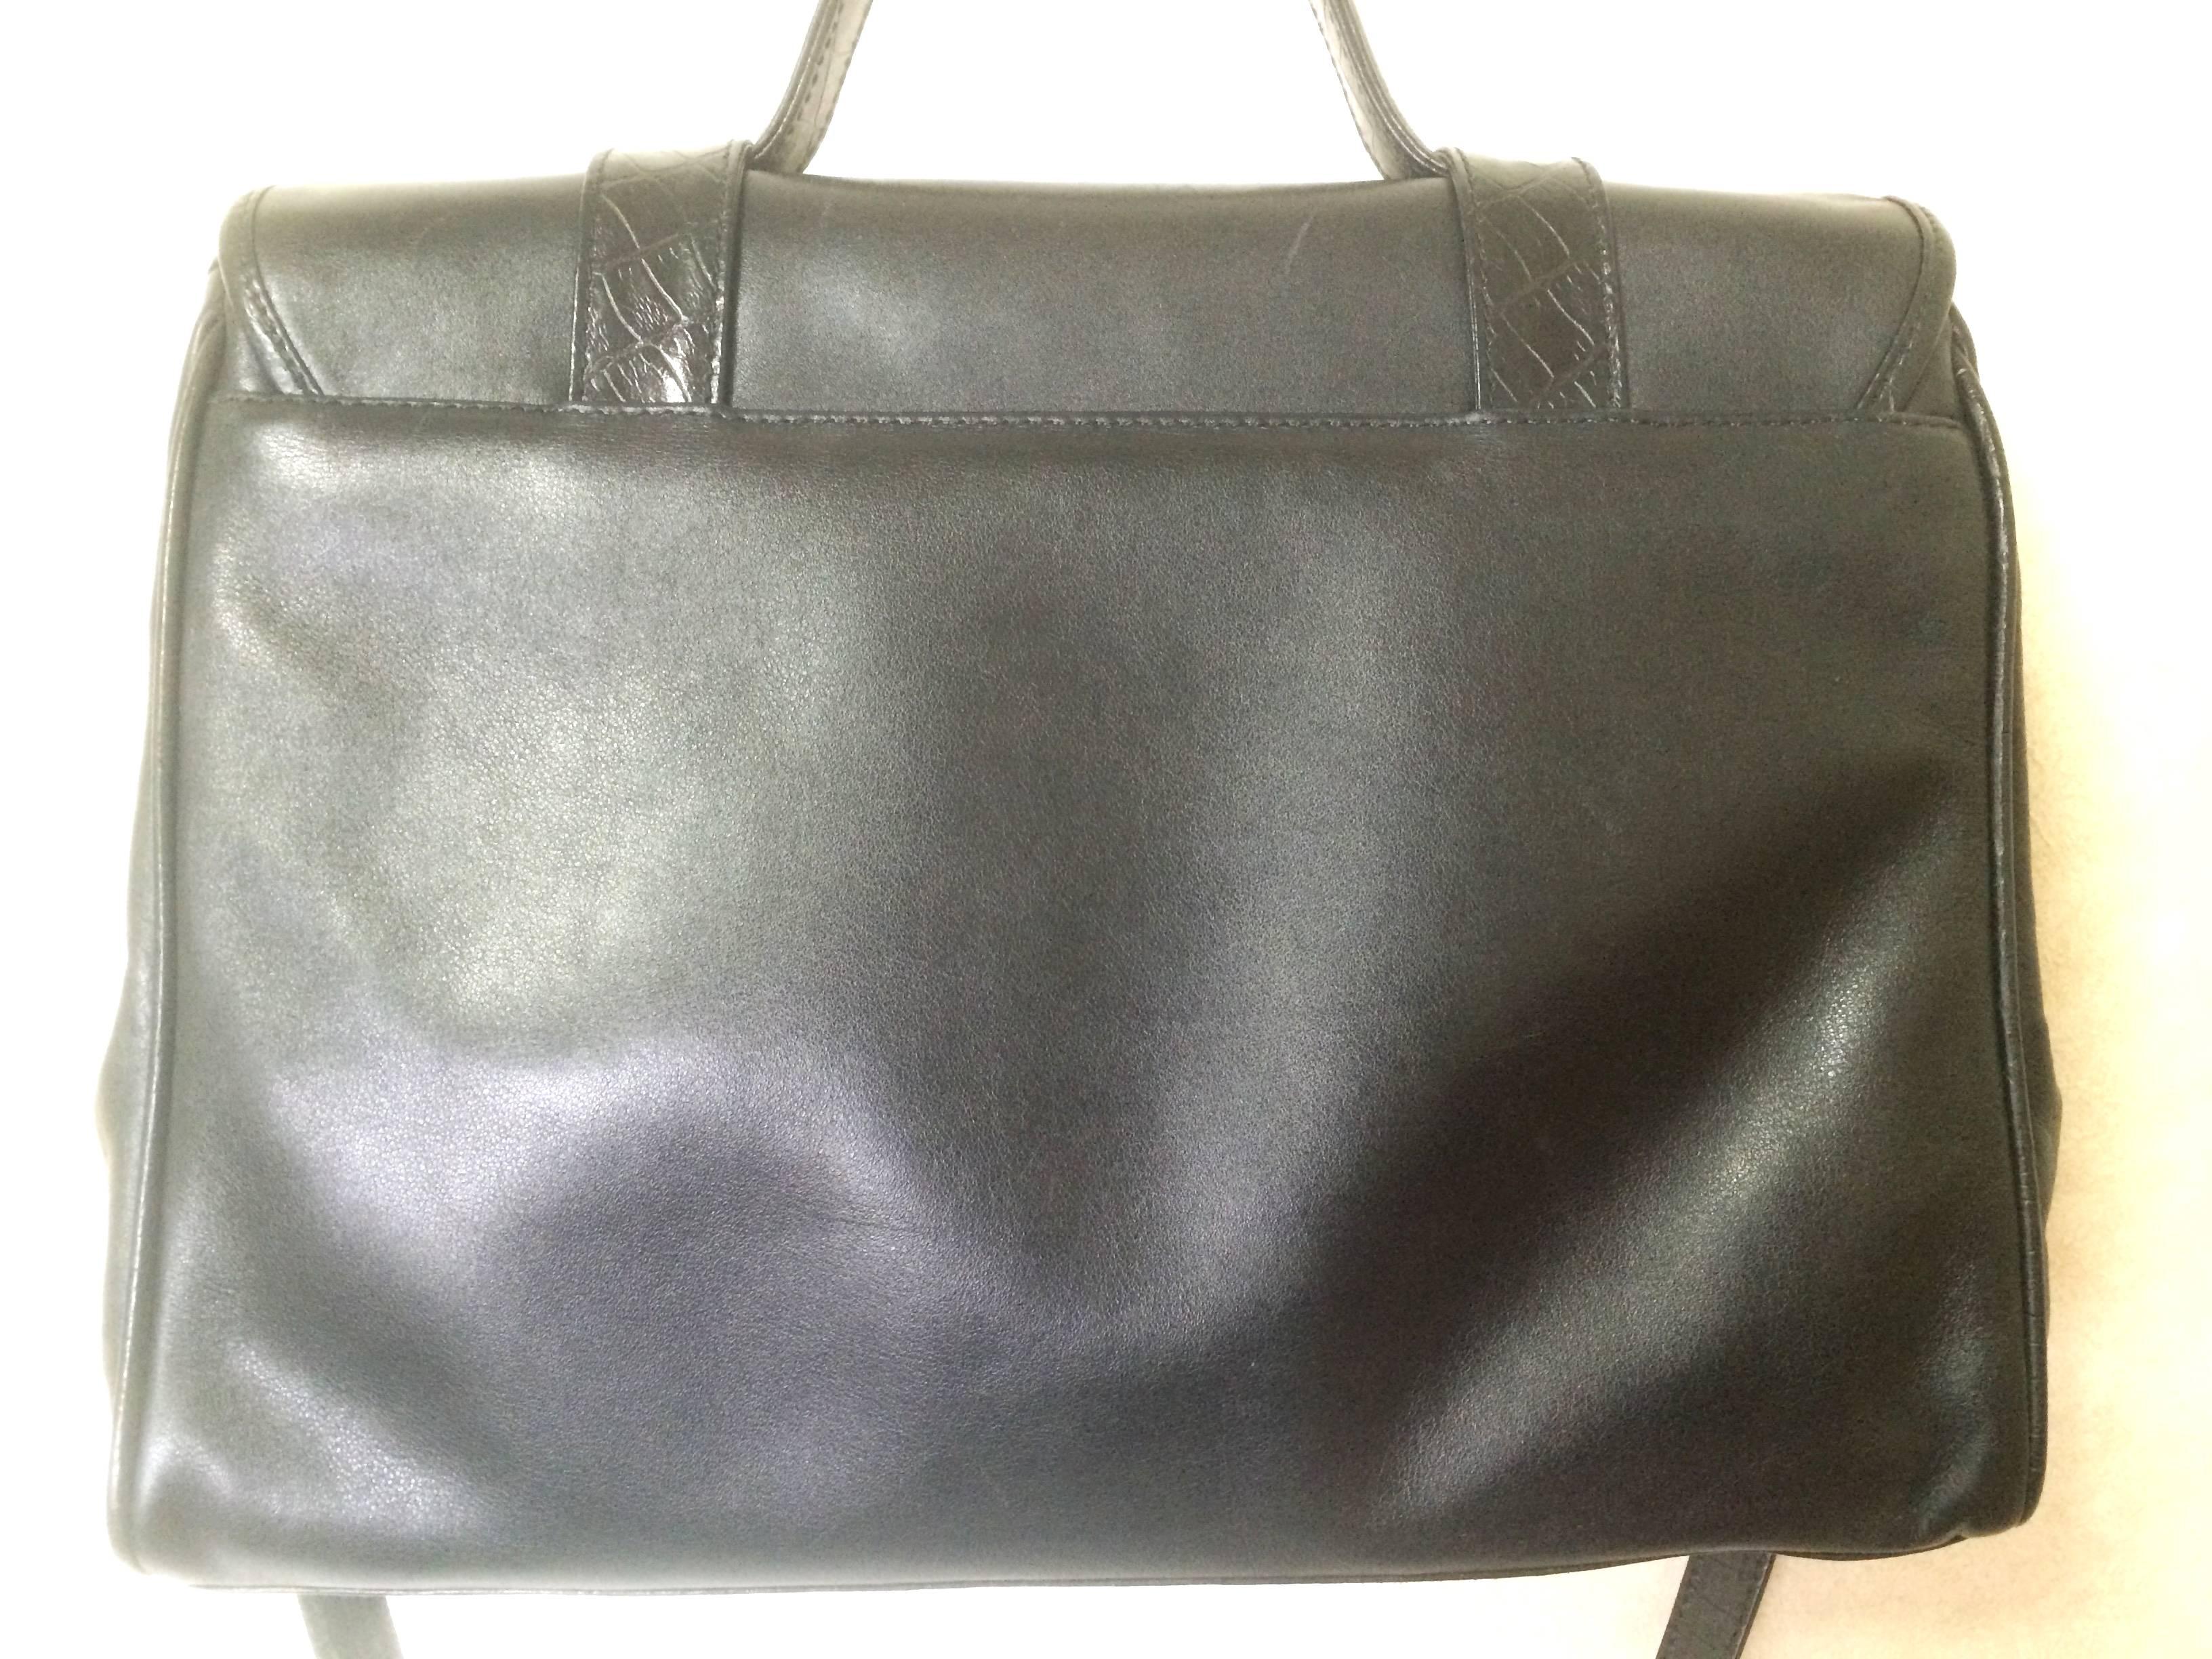 1990s. Vintage FENDI genuine black leather kelly style shoulder bag with croc-embossed leather and FF logo. Rare masterpiece.

Introducing another masterpiece leather bag from FENDI in kelly shape from the old era.
Combination of nappa leather